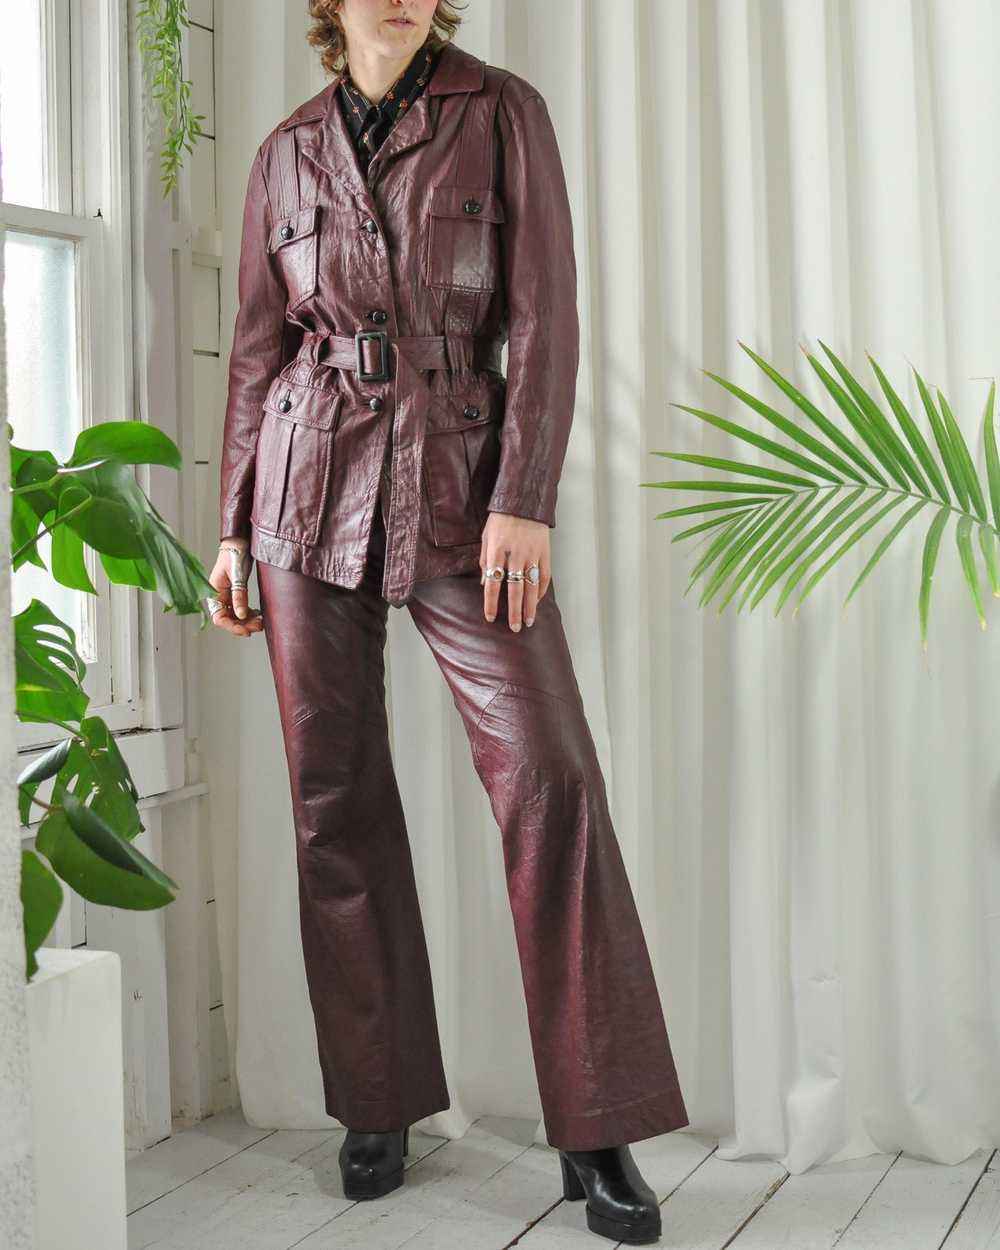 70s Burgundy Leather Pant Suit - image 1